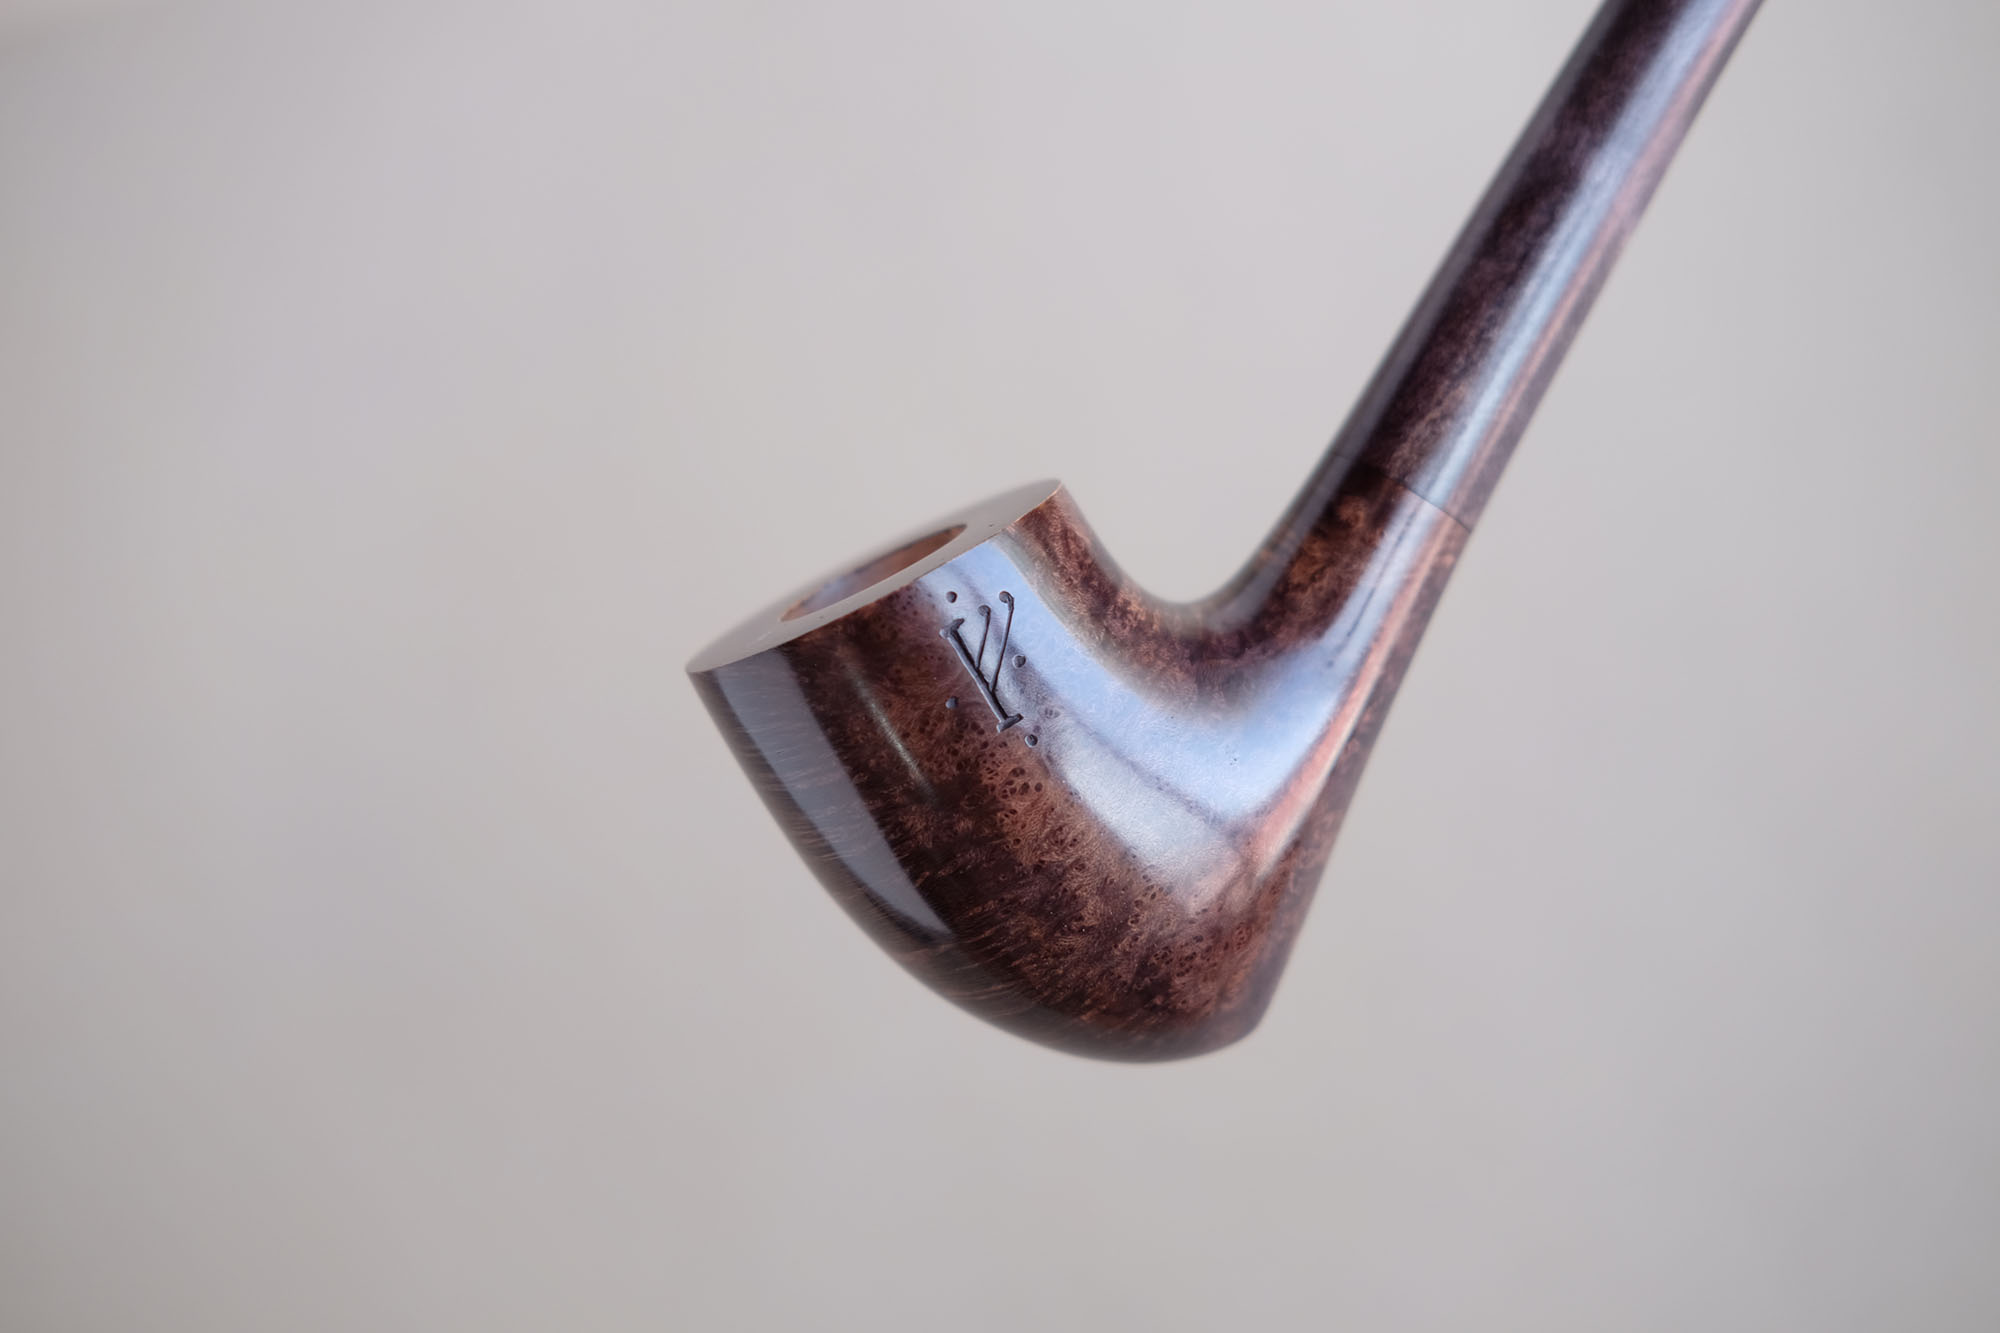 Gandalf's pipe standbard version, long churchwarden tobacco pipe made of briar with maple stem, hand crafted by Arcangelo Ambrosi